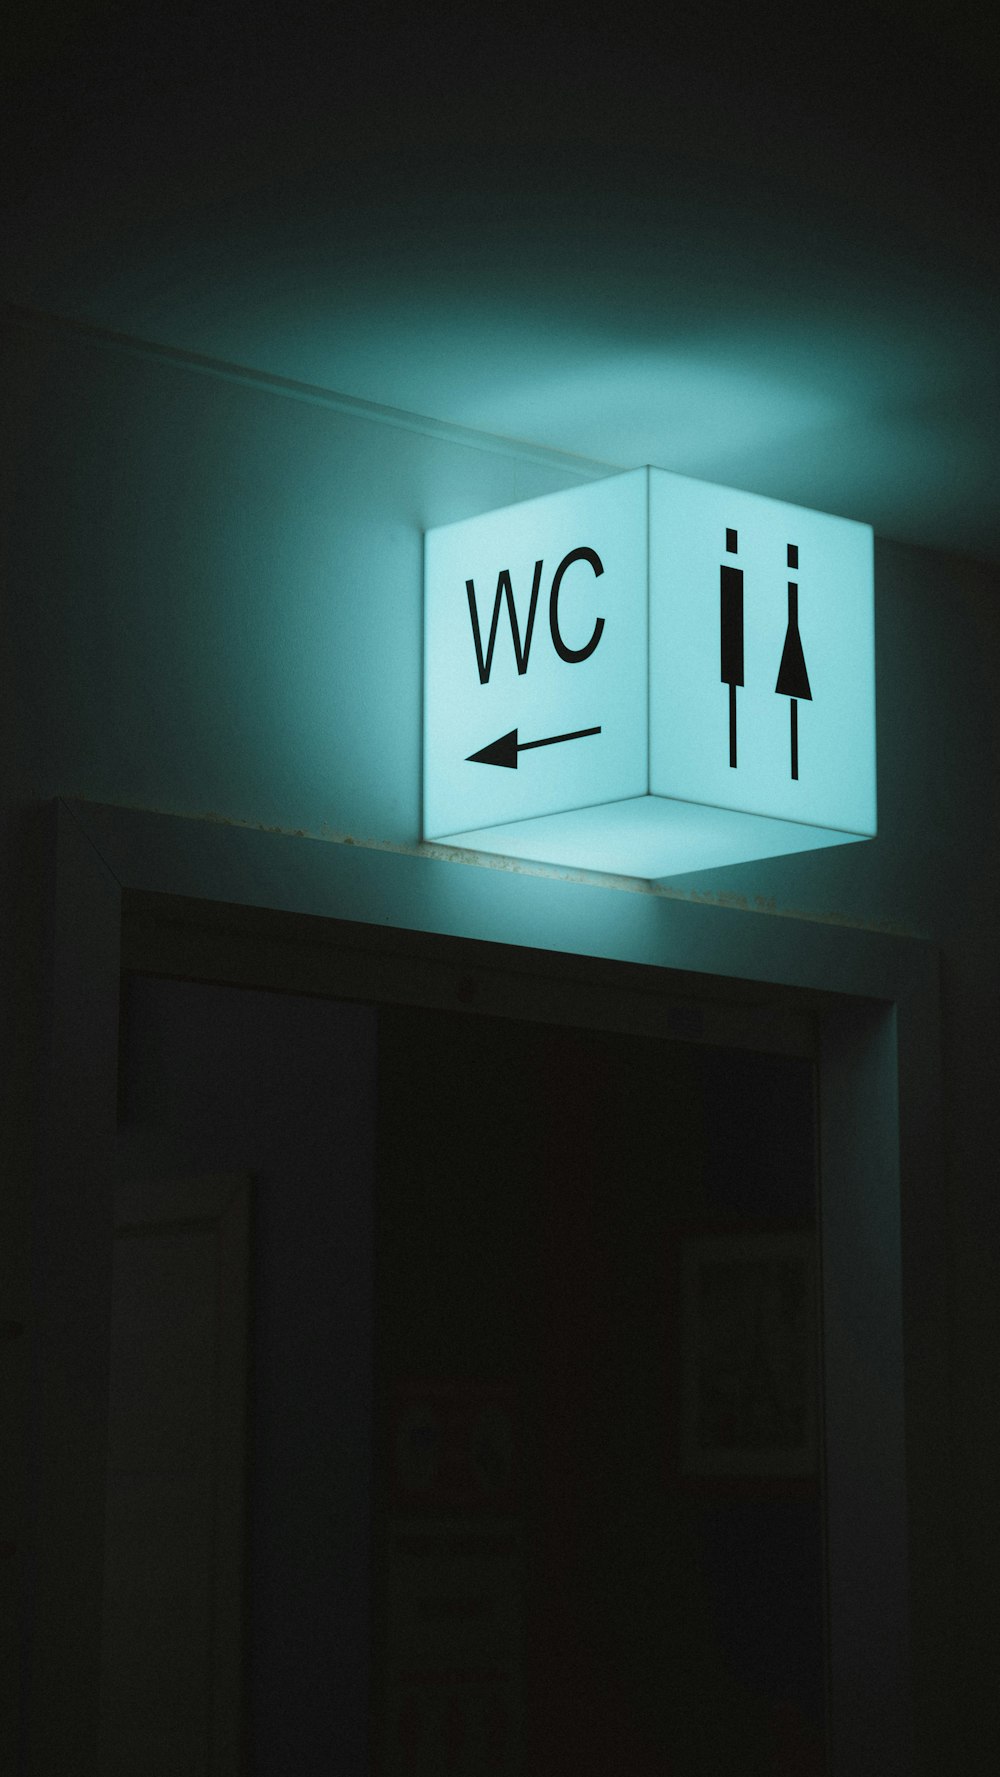 white and blue wall mounted exit sign